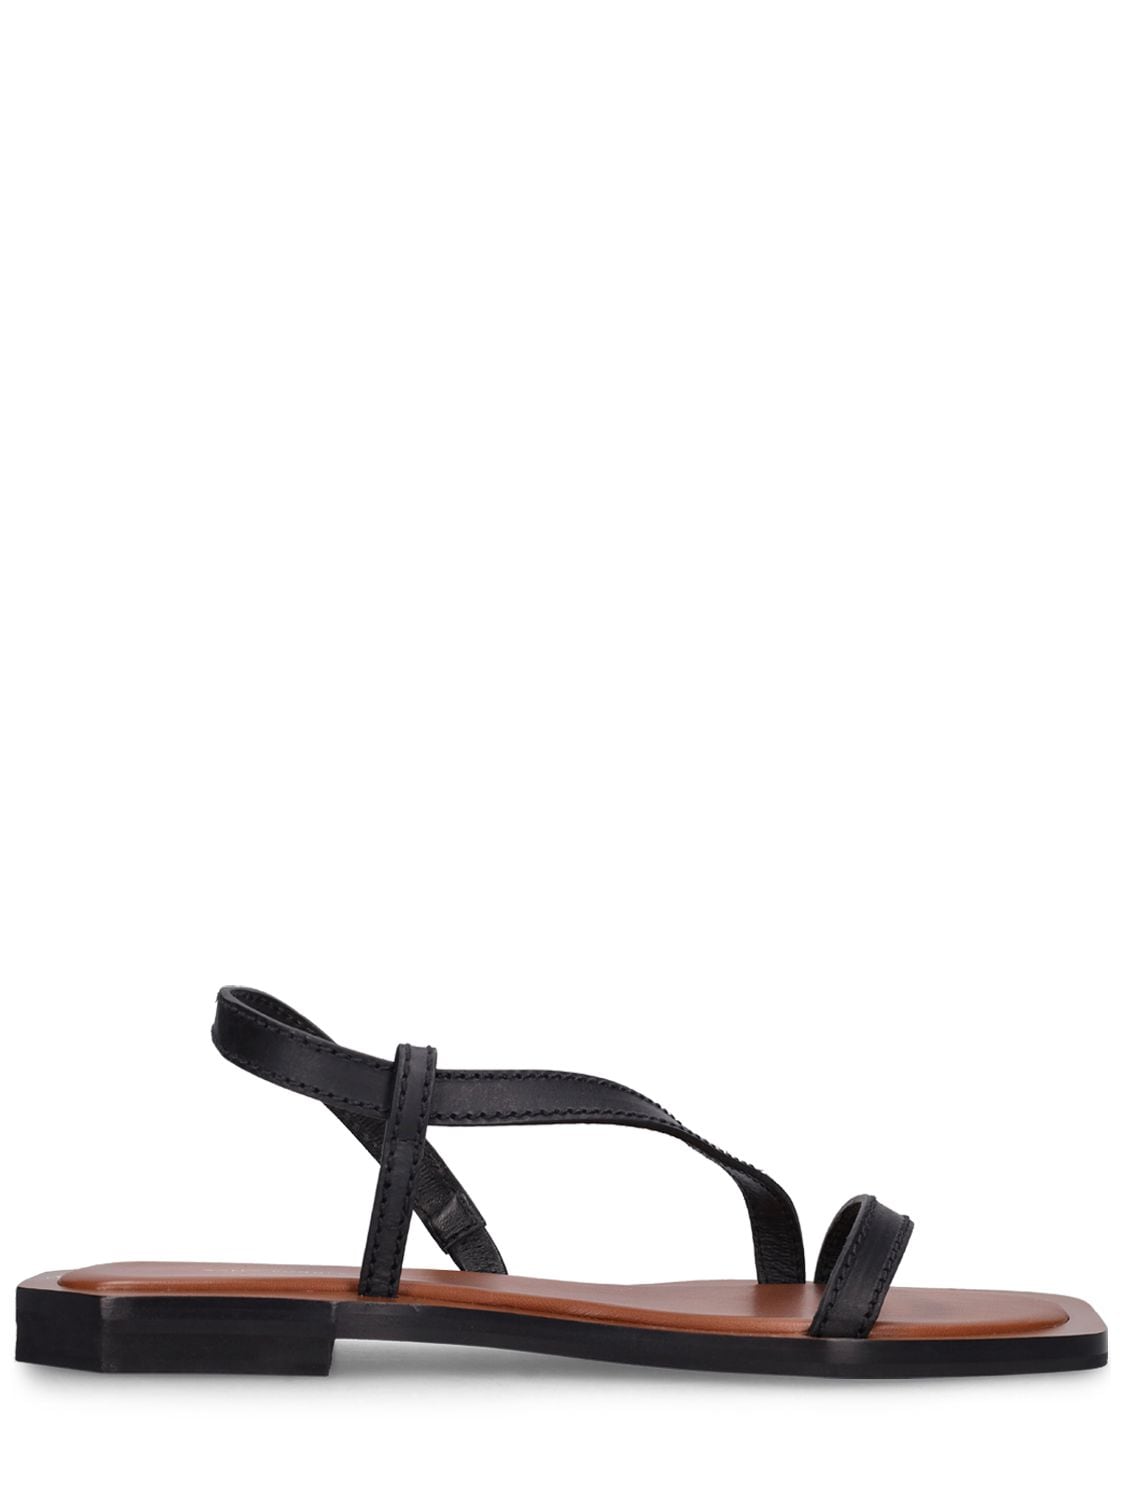 Wales Bonner Ghanese Leather Sandals In Black